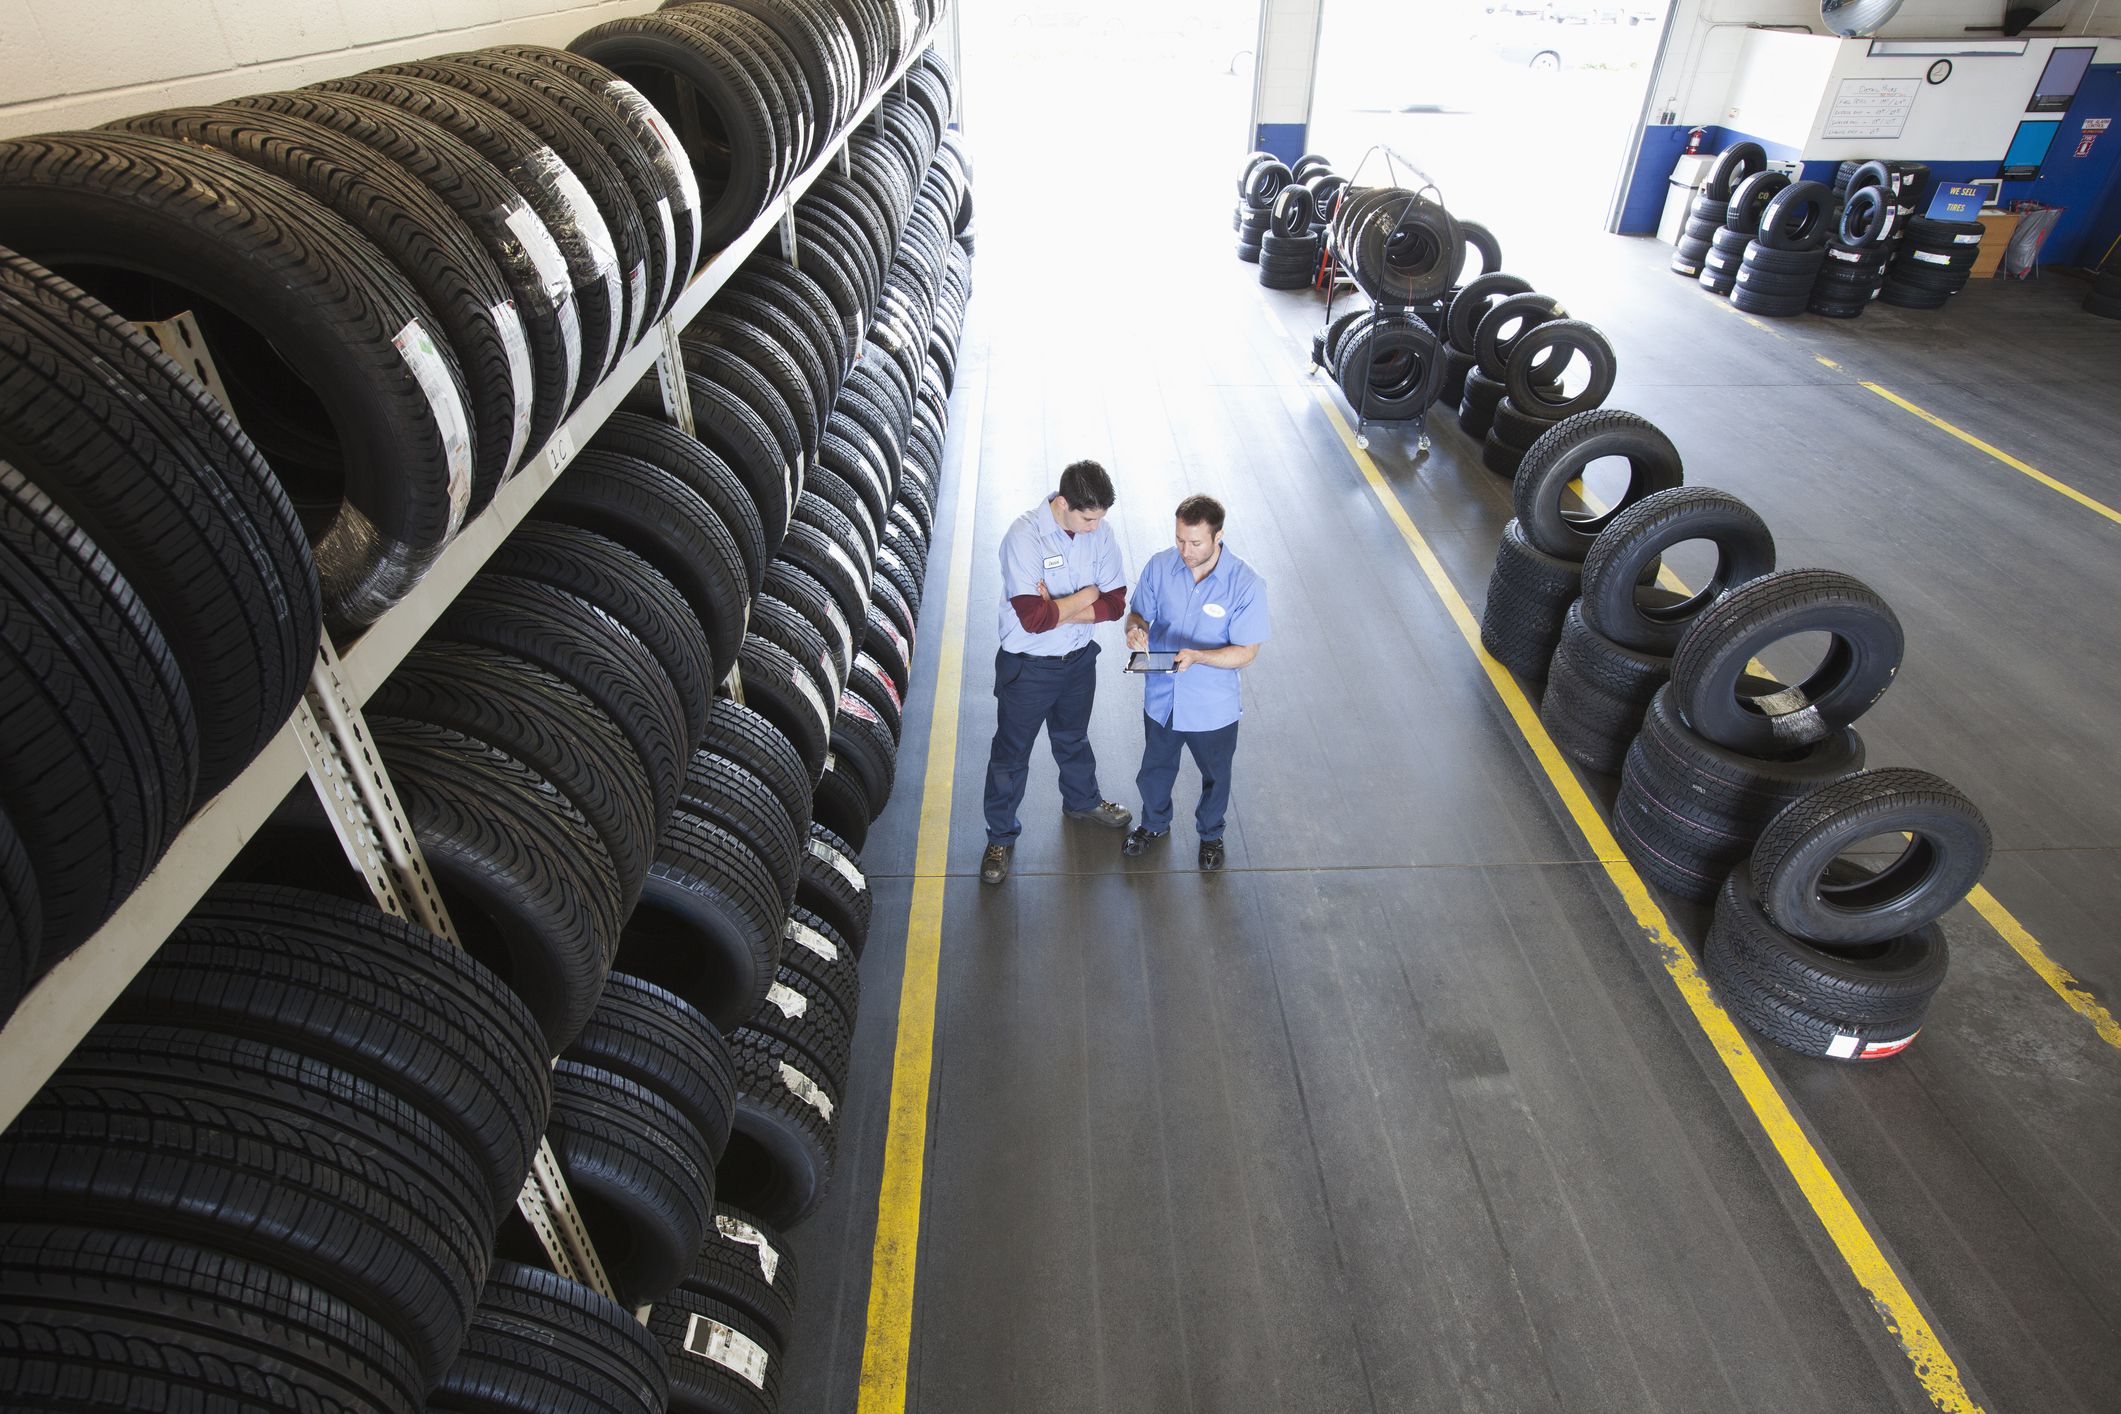 How to Figure Out What Size Tires You Need